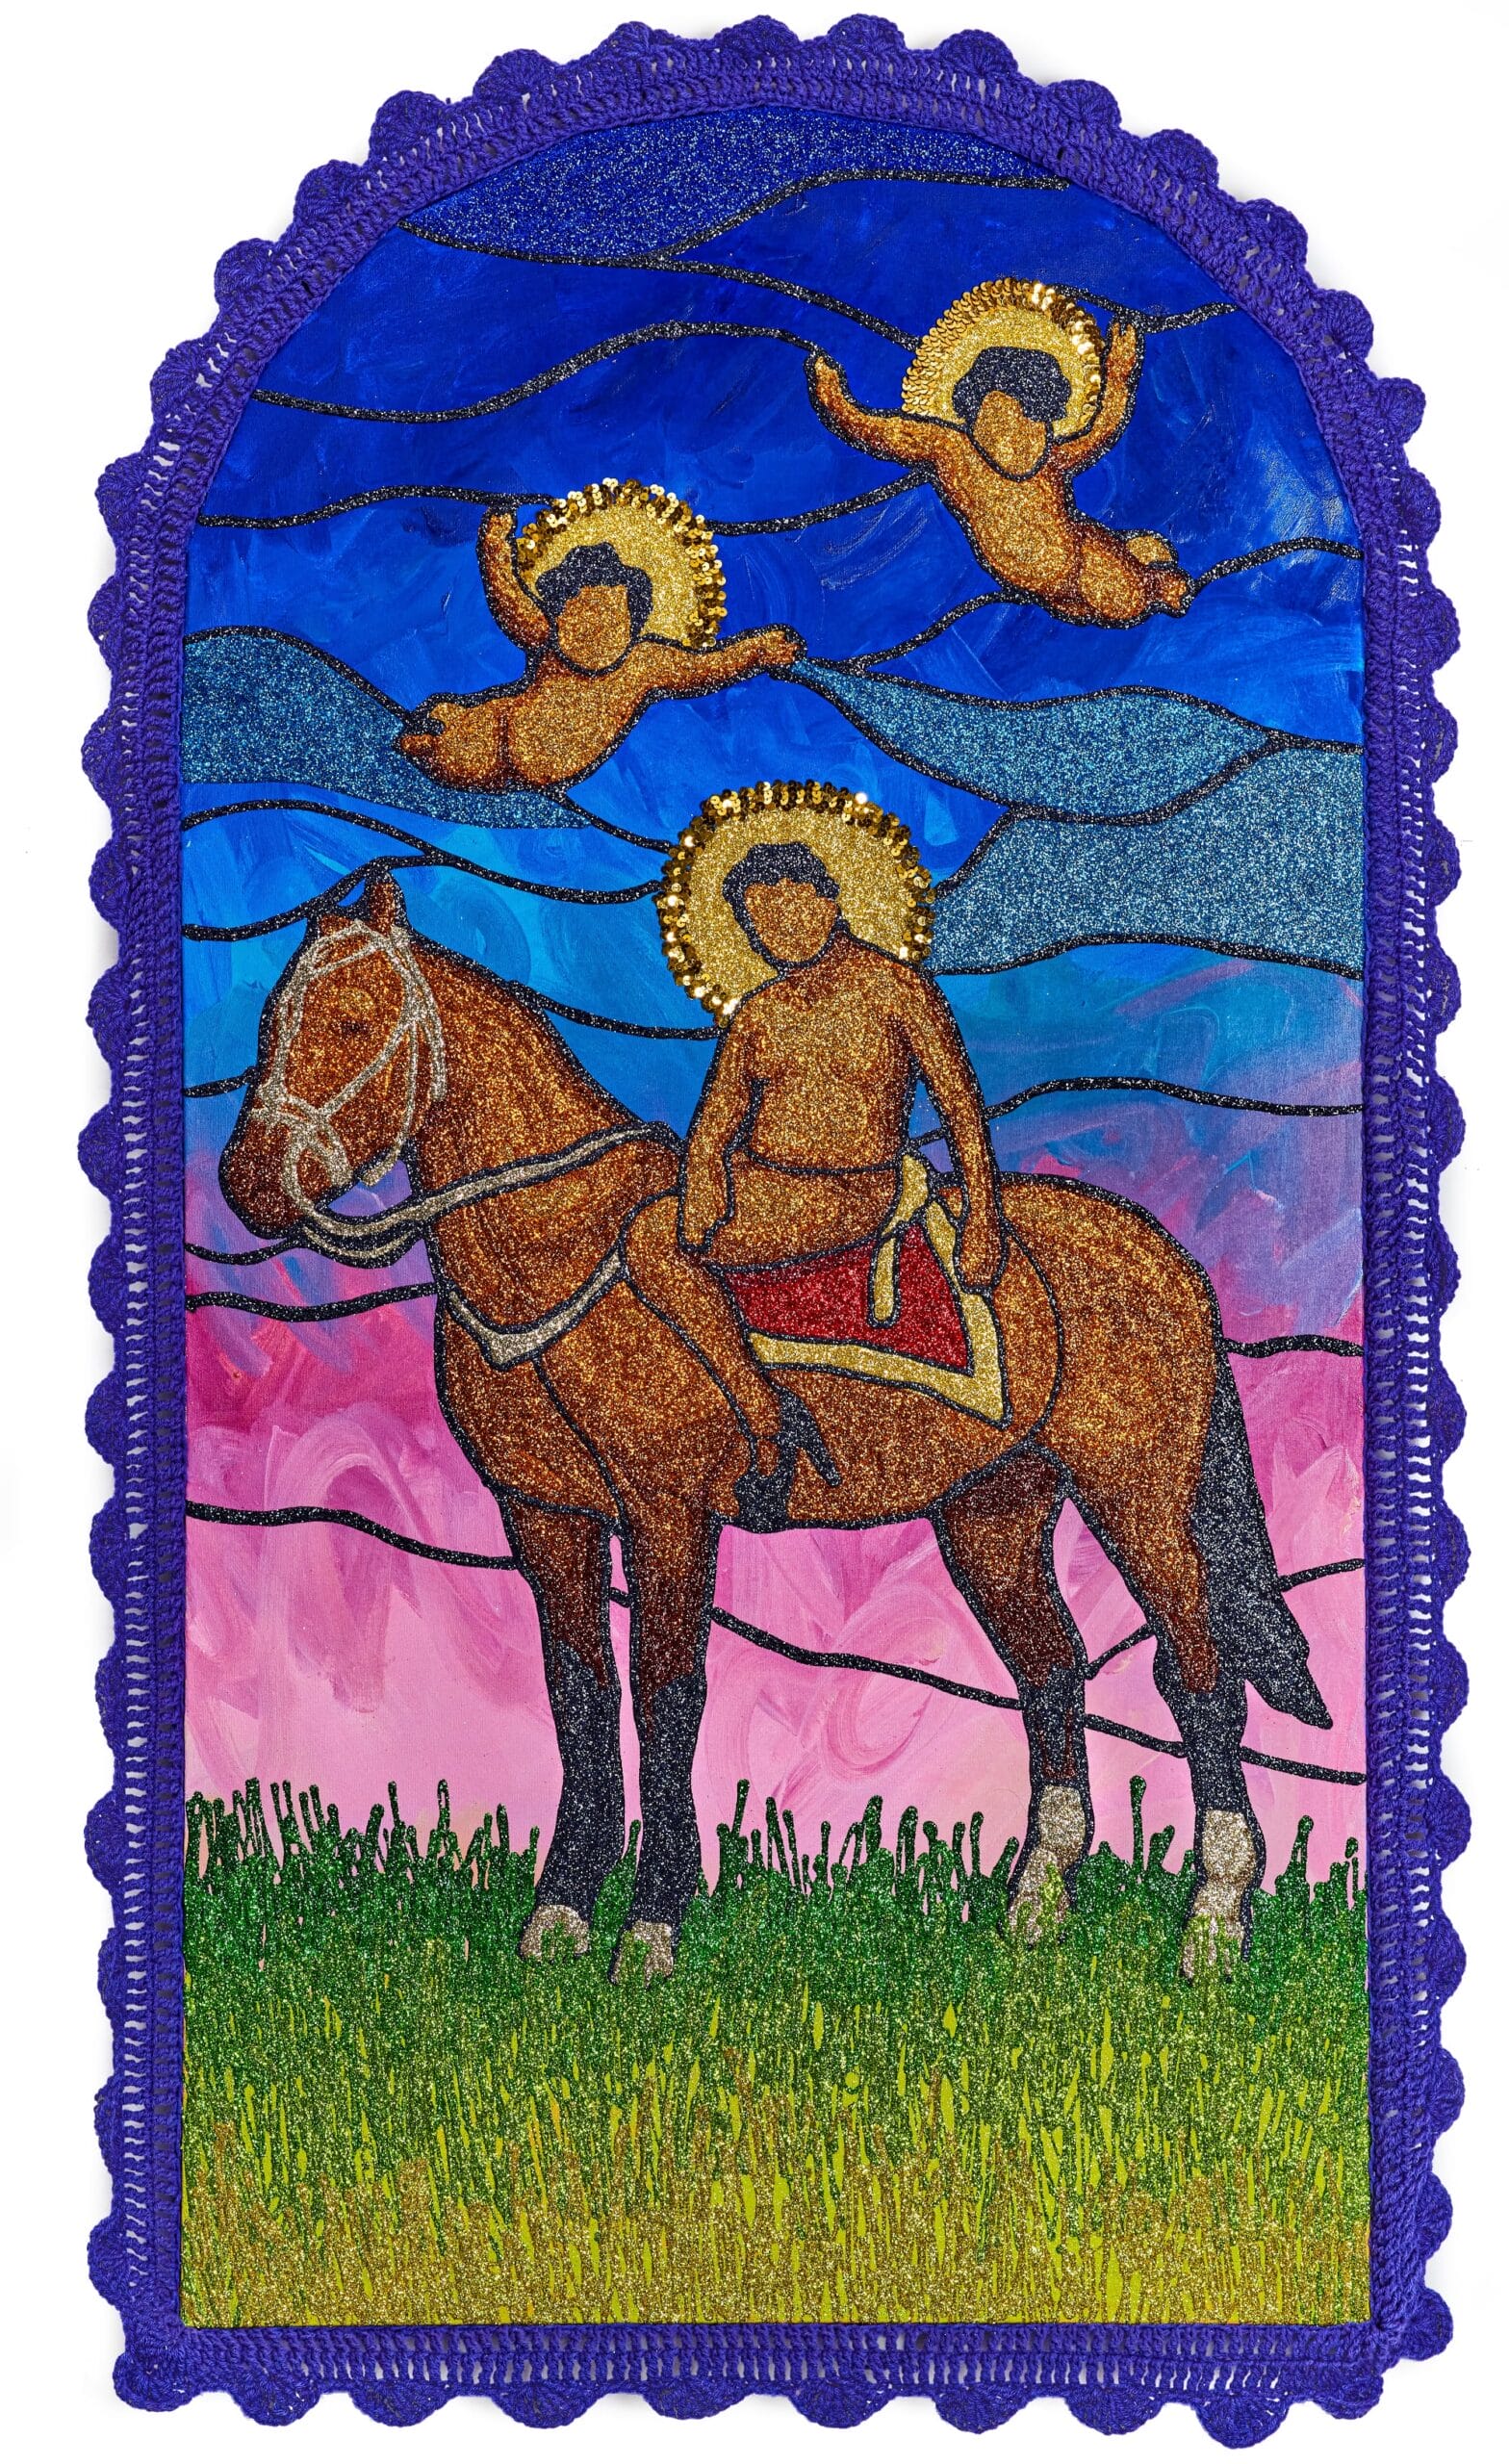 two faceless cherubs float above a faceless figure on a horse. all are rendered in glitter with a purple crocheted frame